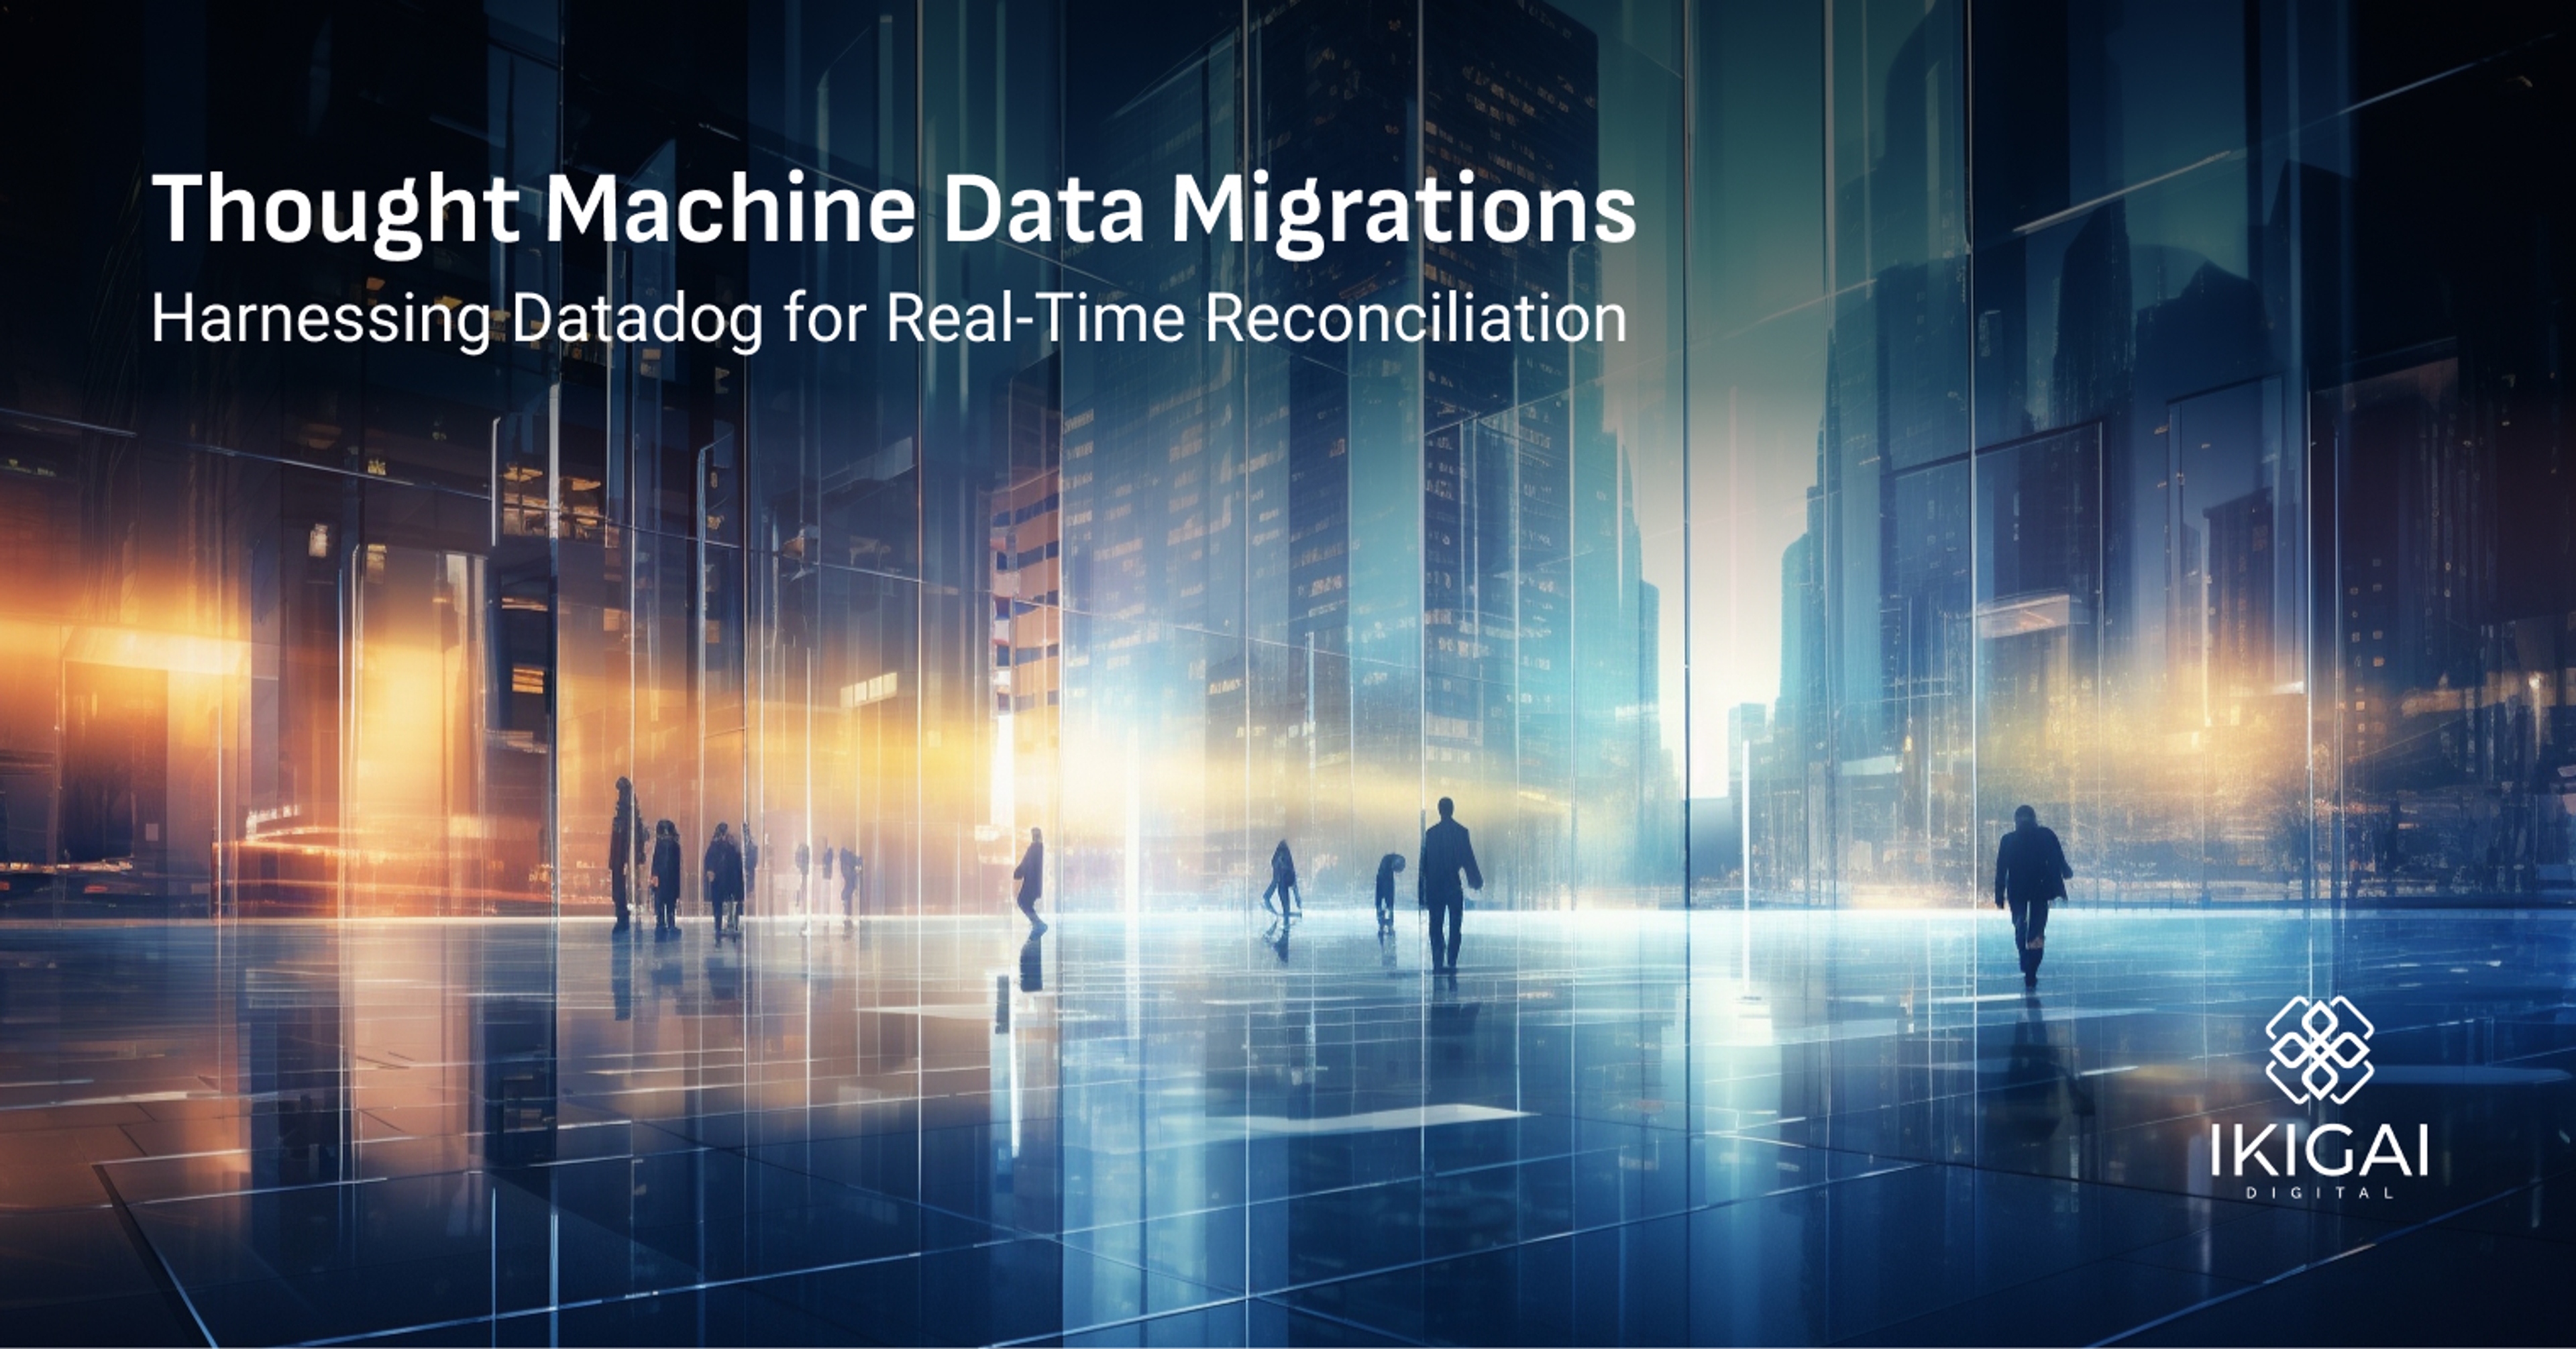 Thought Machine Data Migrations: Harnessing Datadog for Real-Time Reconciliation